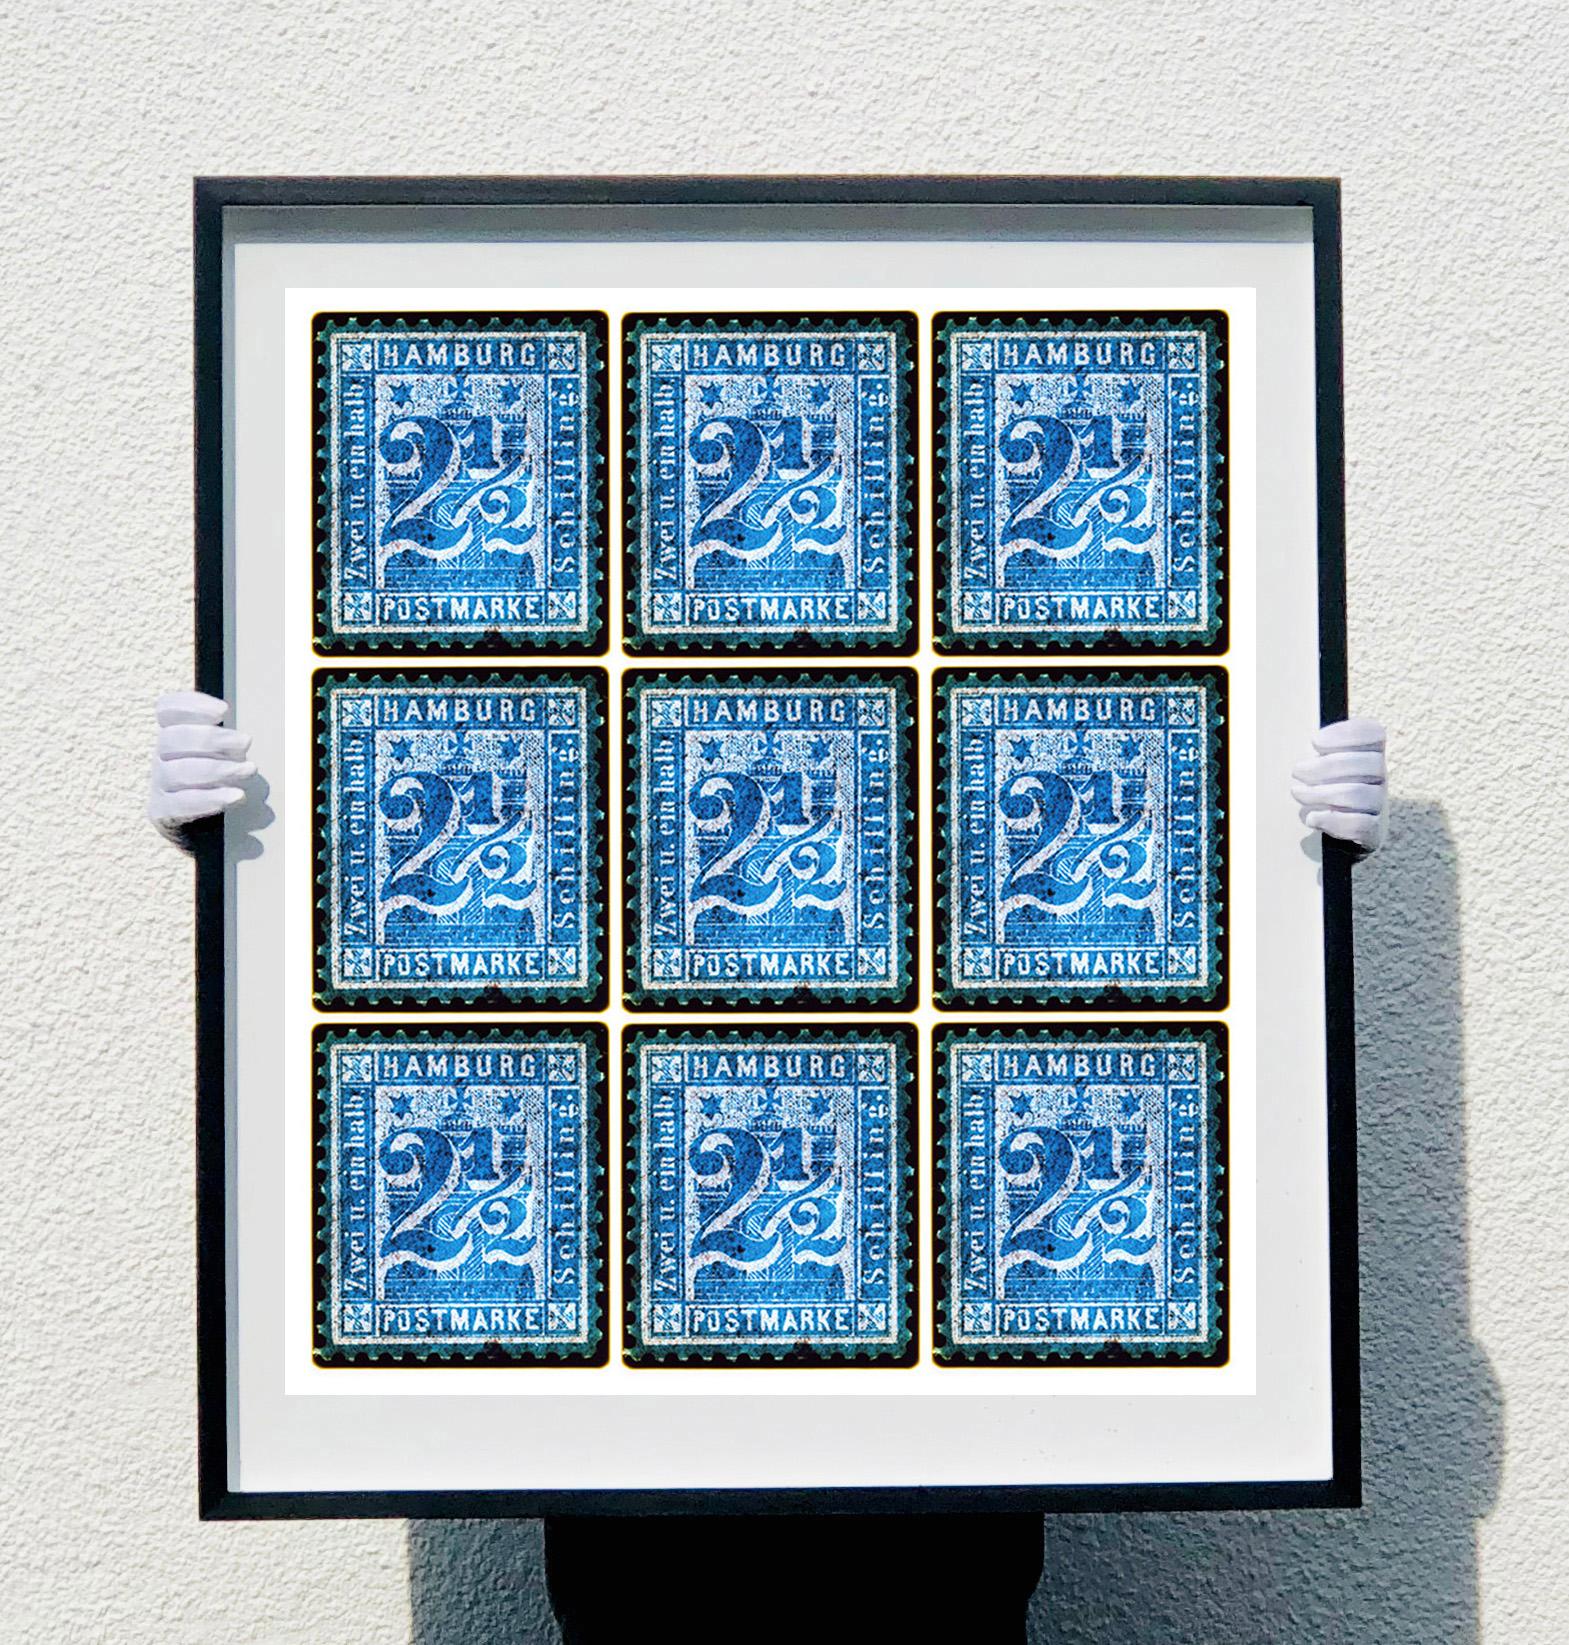 Stamp Collection, 1864 Hamburg (Blue Mosaic German Stamps) - Pop Art Color Photo - Print by Heidler & Heeps